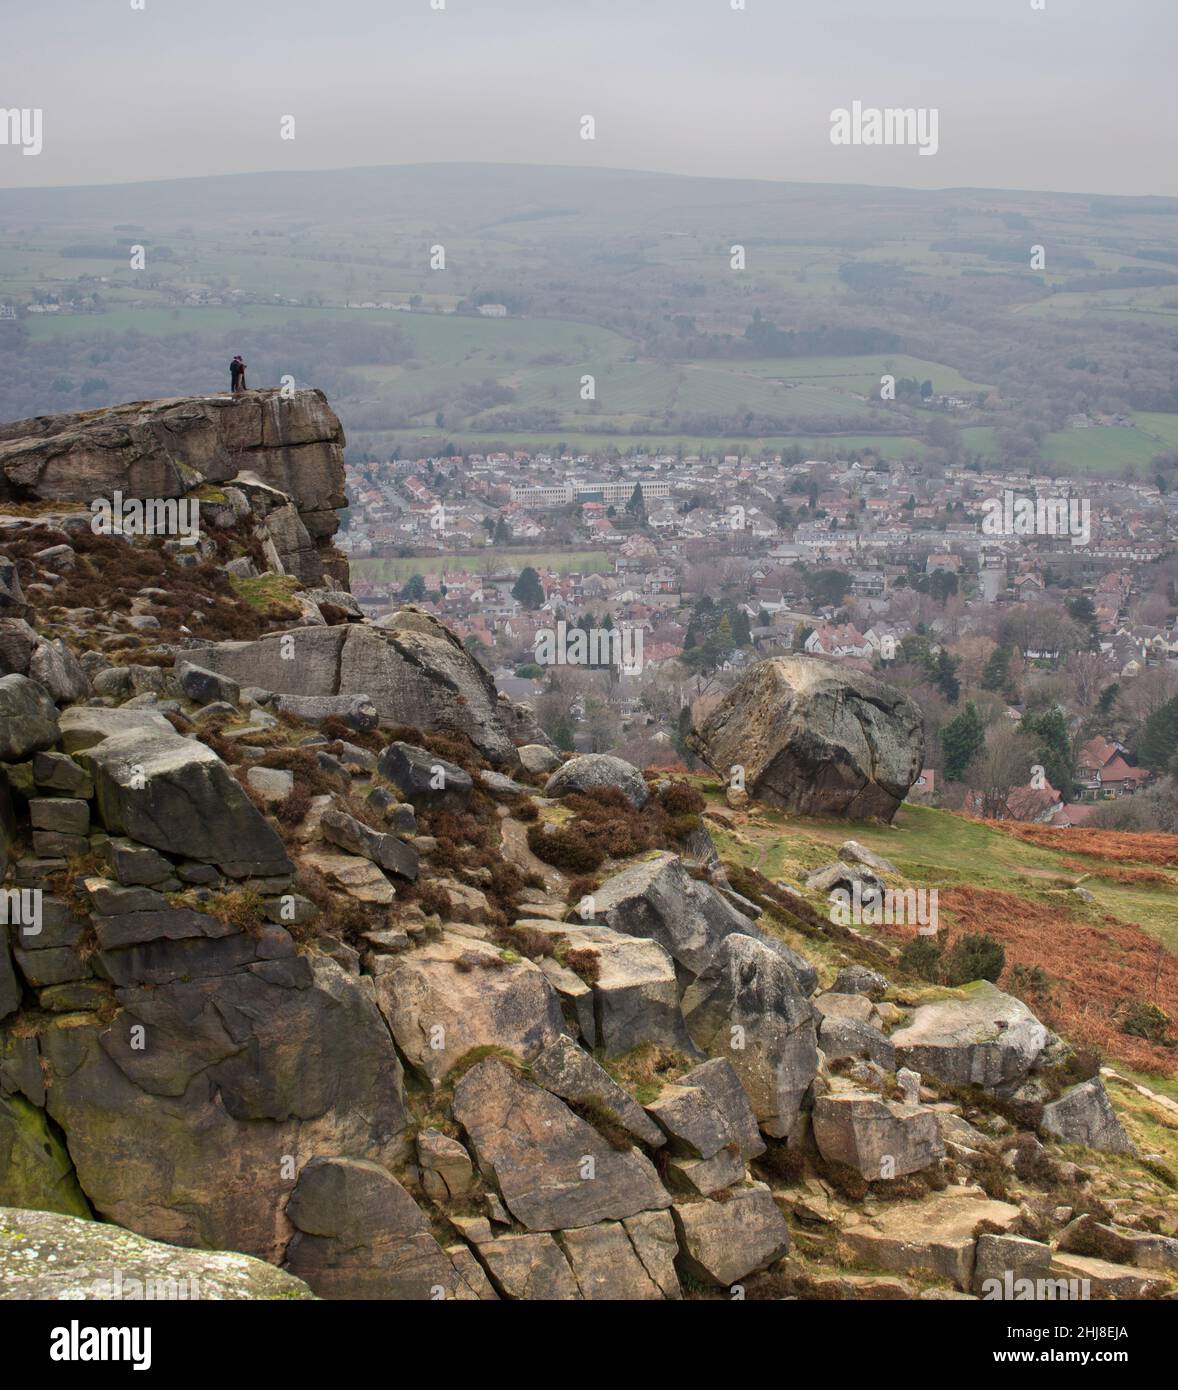 People standing on the edge of the Cow and Calf rock formation, pointing towards the town of Ilkley, below Stock Photo